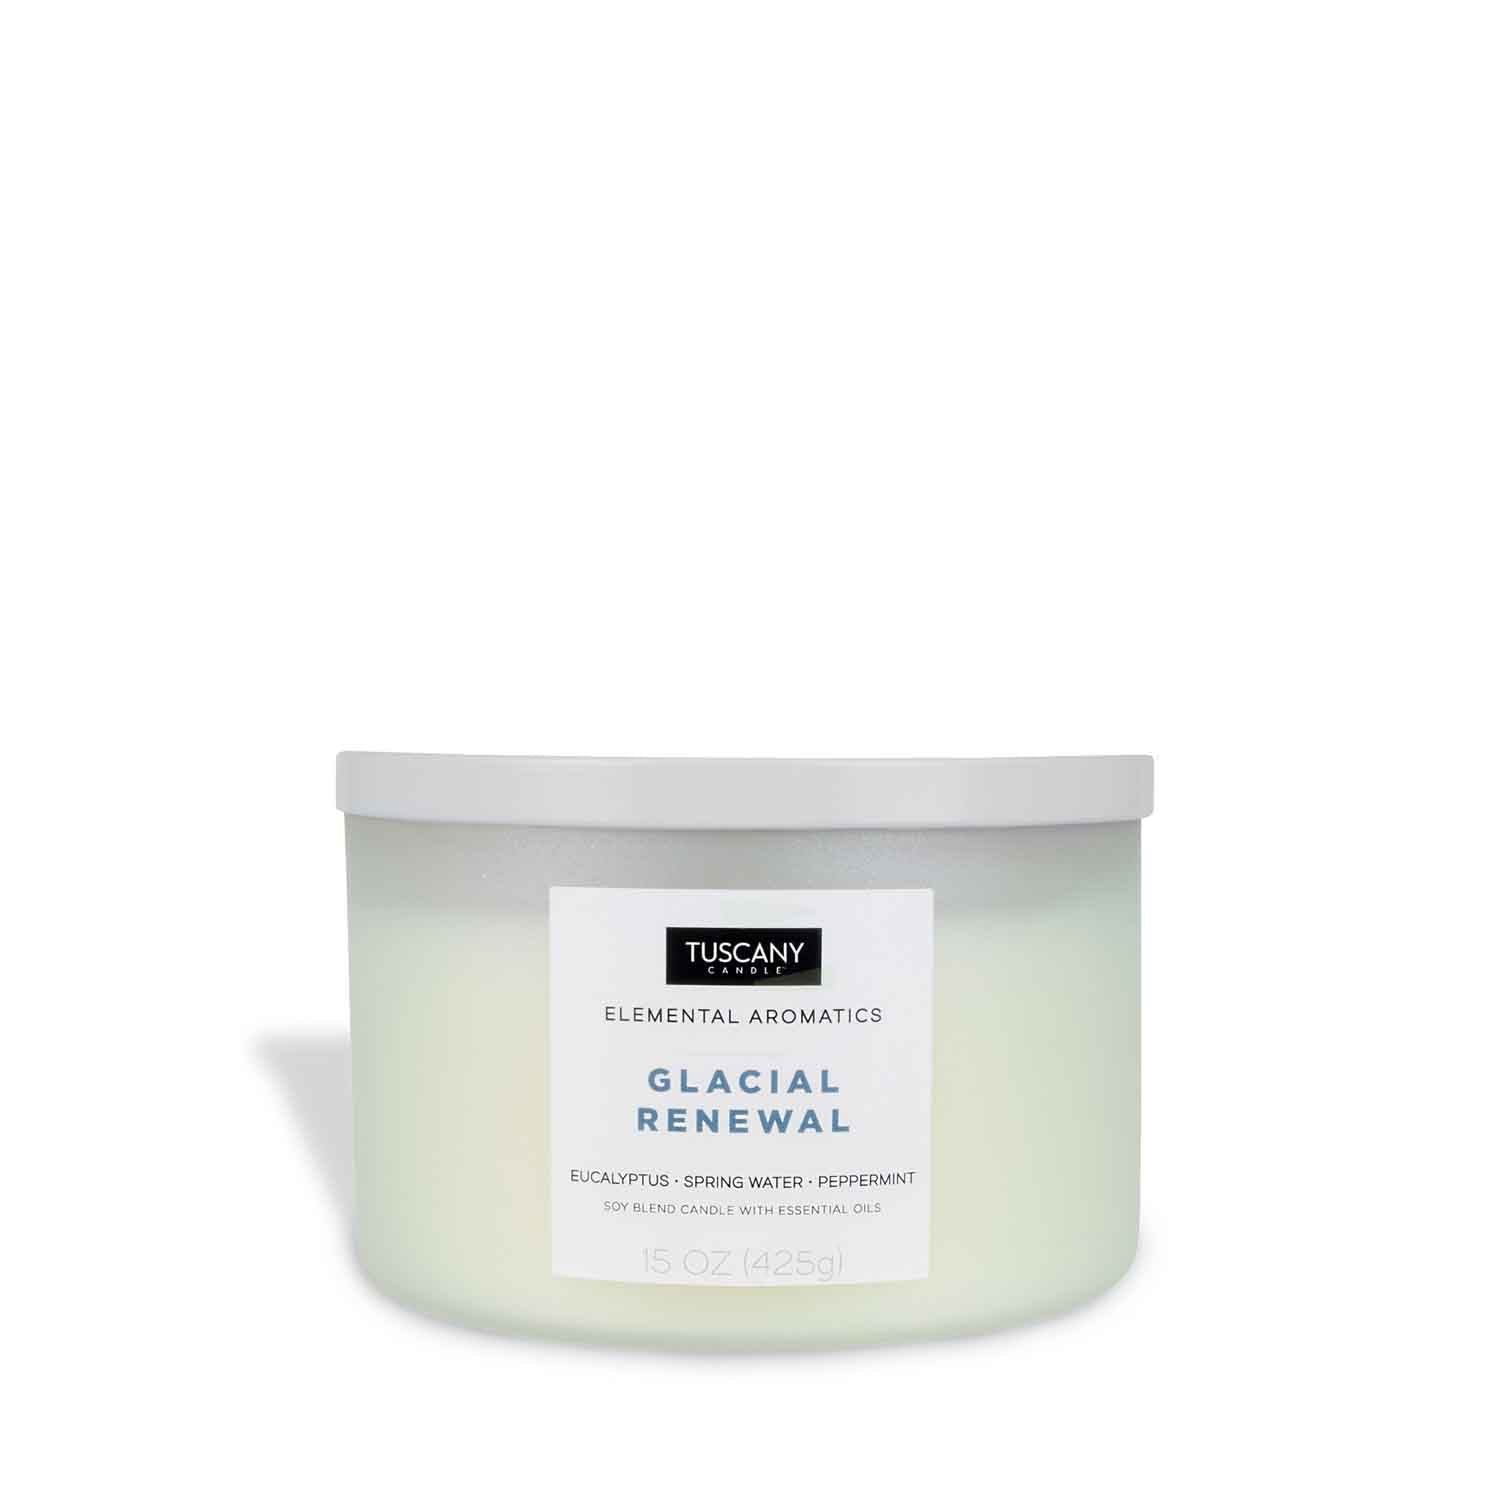 A refreshing tin of Glacial Renewal Scented Jar Candle (15 oz) – Elemental Aromatics Collection by Tuscany Candle on a white background.